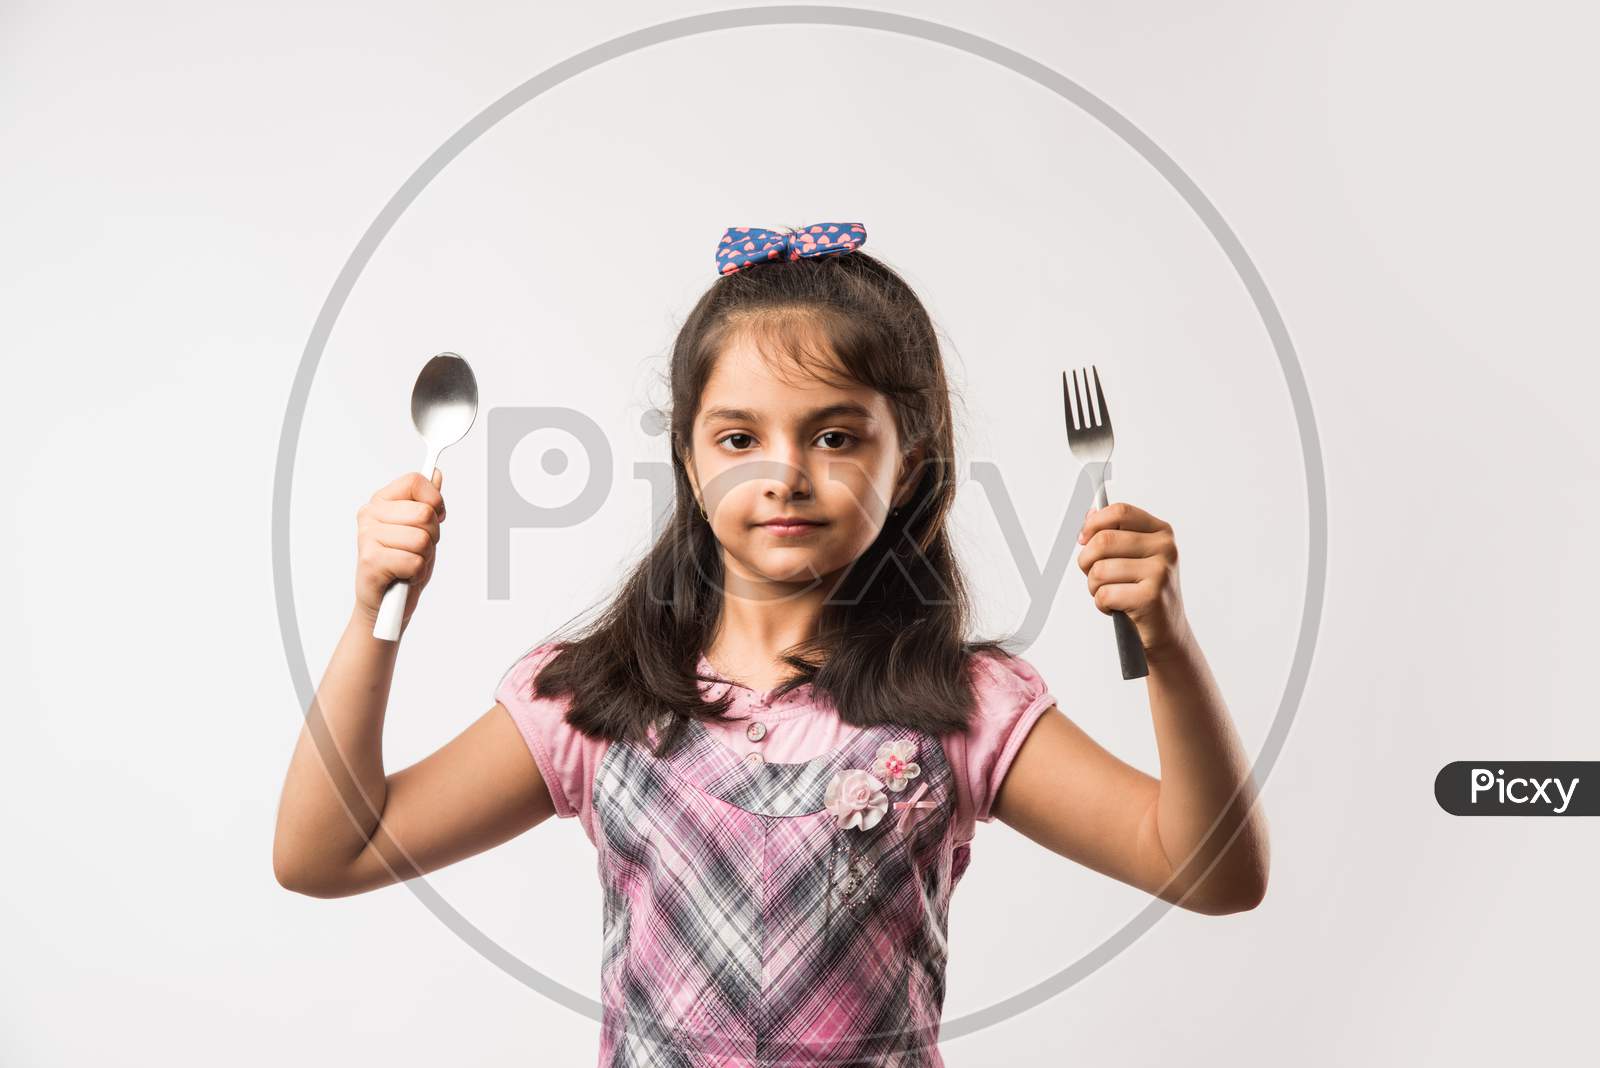 Small Girl showing spoon and fork over white background